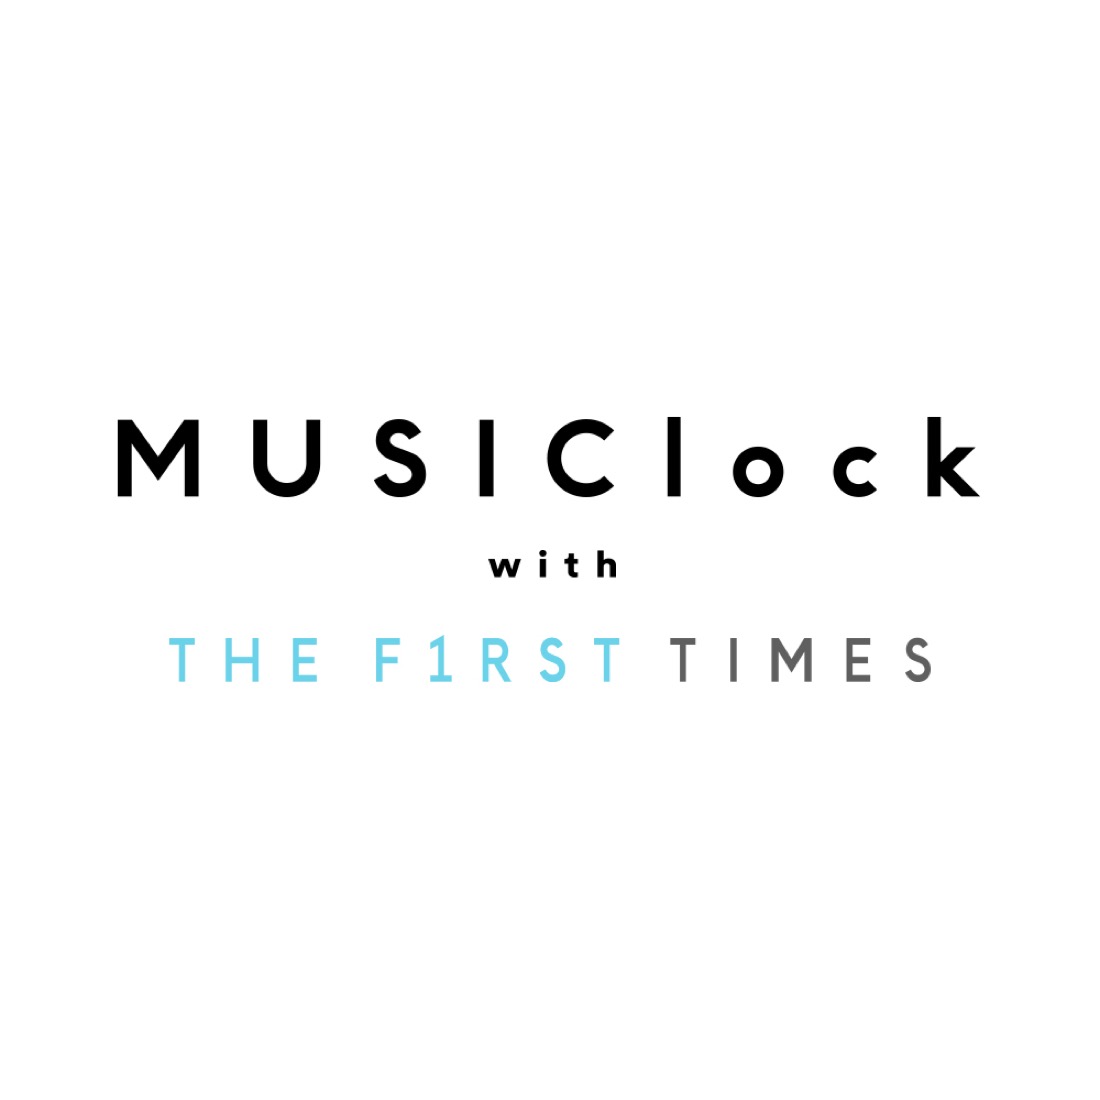 interFM『MUSIClock with THE FIRST TIMES』が“朝のバラエティ番組”としてリニューアル！ - 画像一覧（4/4）